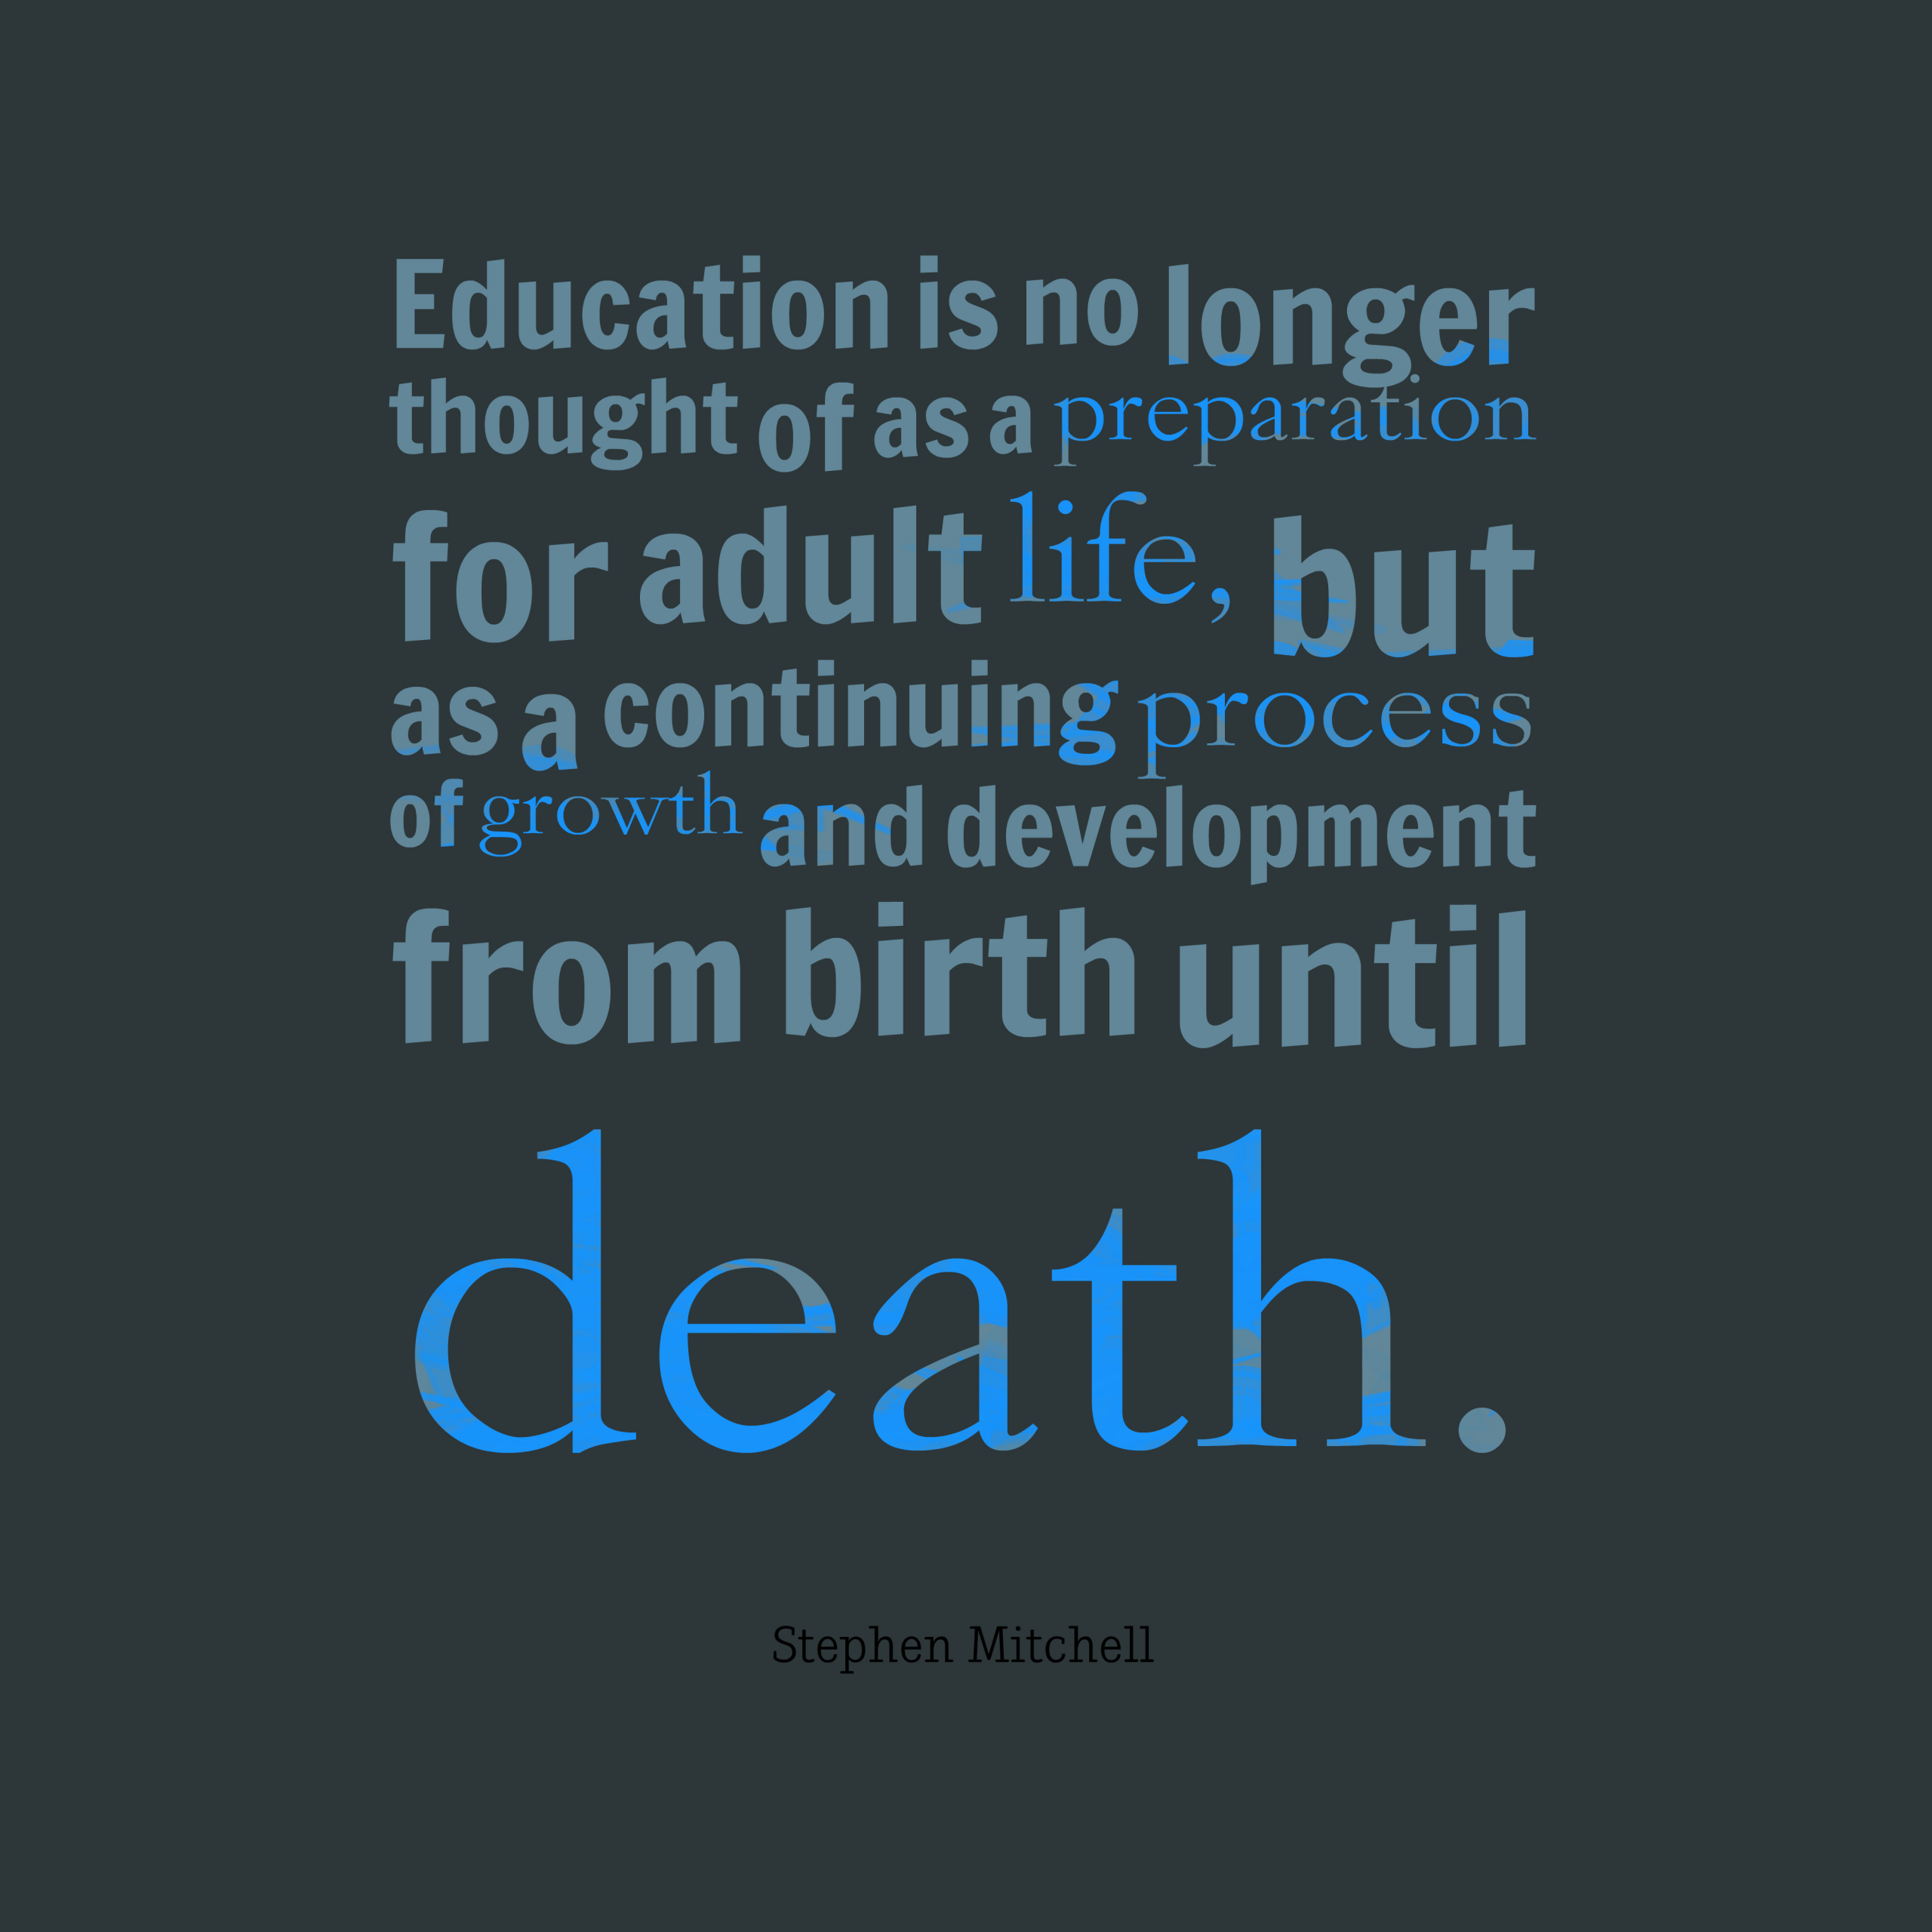 Continuing Education Quotes
 Get high resolution using text from Stephen Mitchell quote